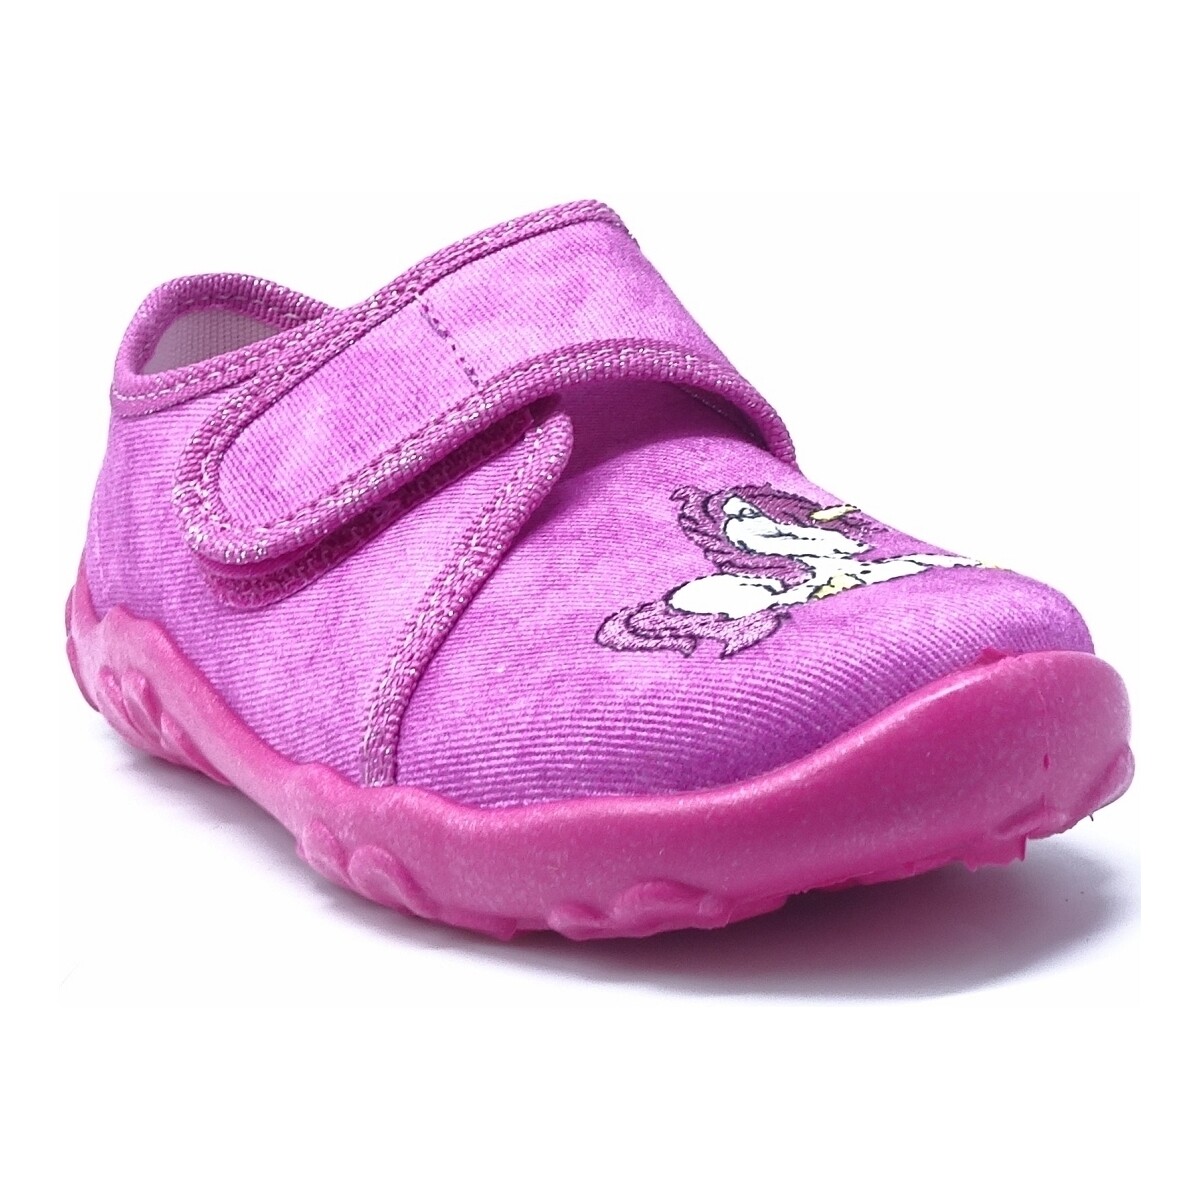 Chaussures Fille Chaussons Superfit 258 Rose